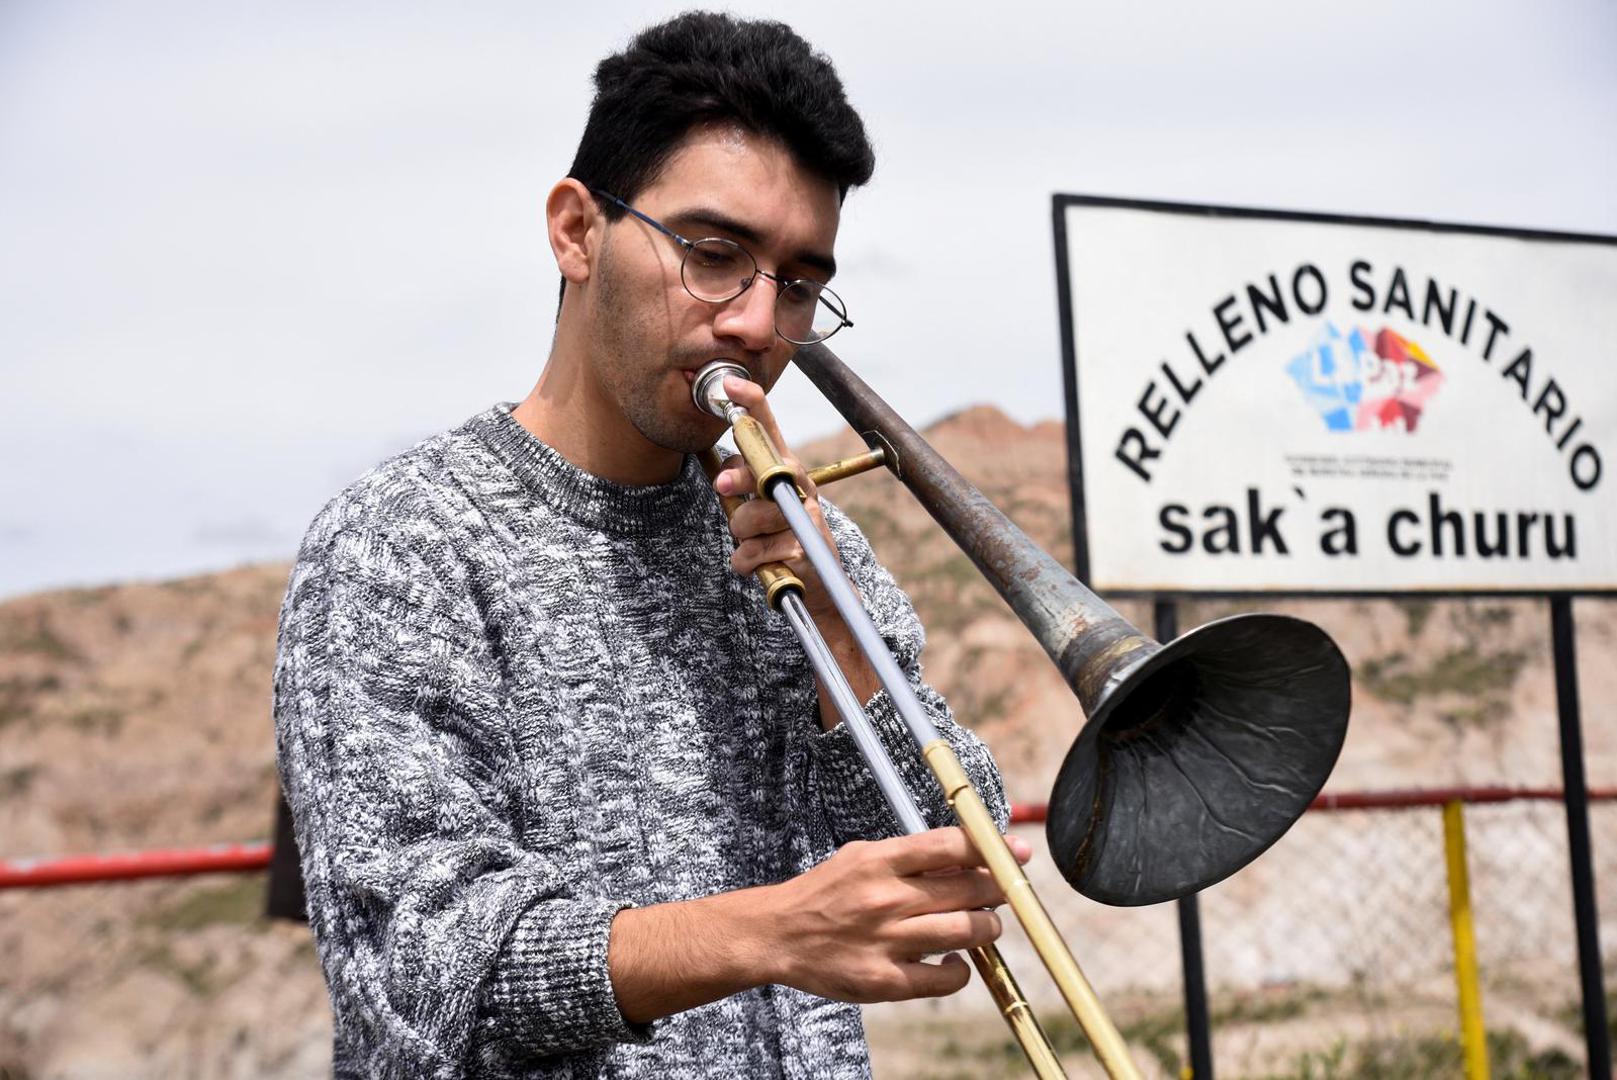 A musician from Paraguay's Orchestra of Recycled Instruments of Cateura, plays a trumpet made with recycled materials at the viewpoint of the Sak'a Churu landfill in Alpacoma, in La Paz, Bolivia February 27, 2023. REUTERS/Claudia Morales Photo: CLAUDIA MORALES/REUTERS